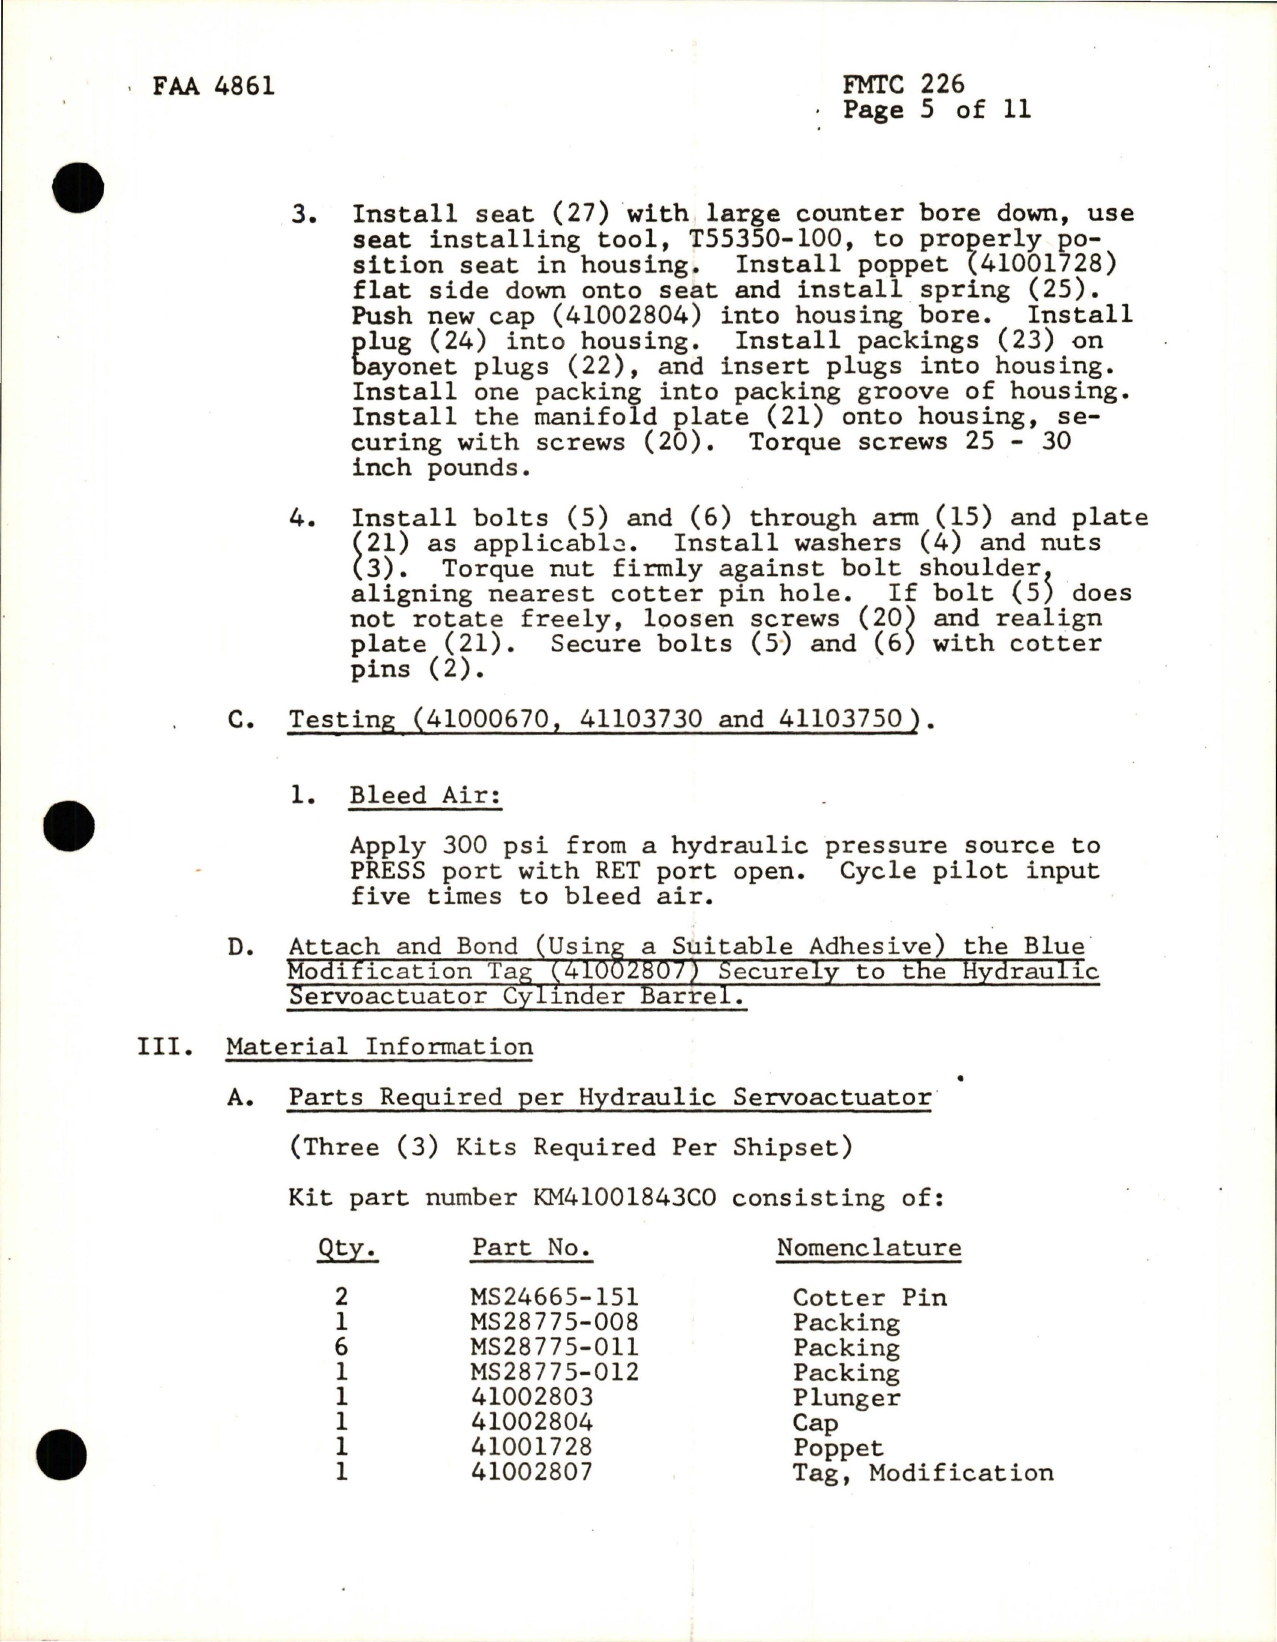 Sample page 5 from AirCorps Library document: Replacement of Hydraulic Servoactuator Sequence Valve Components